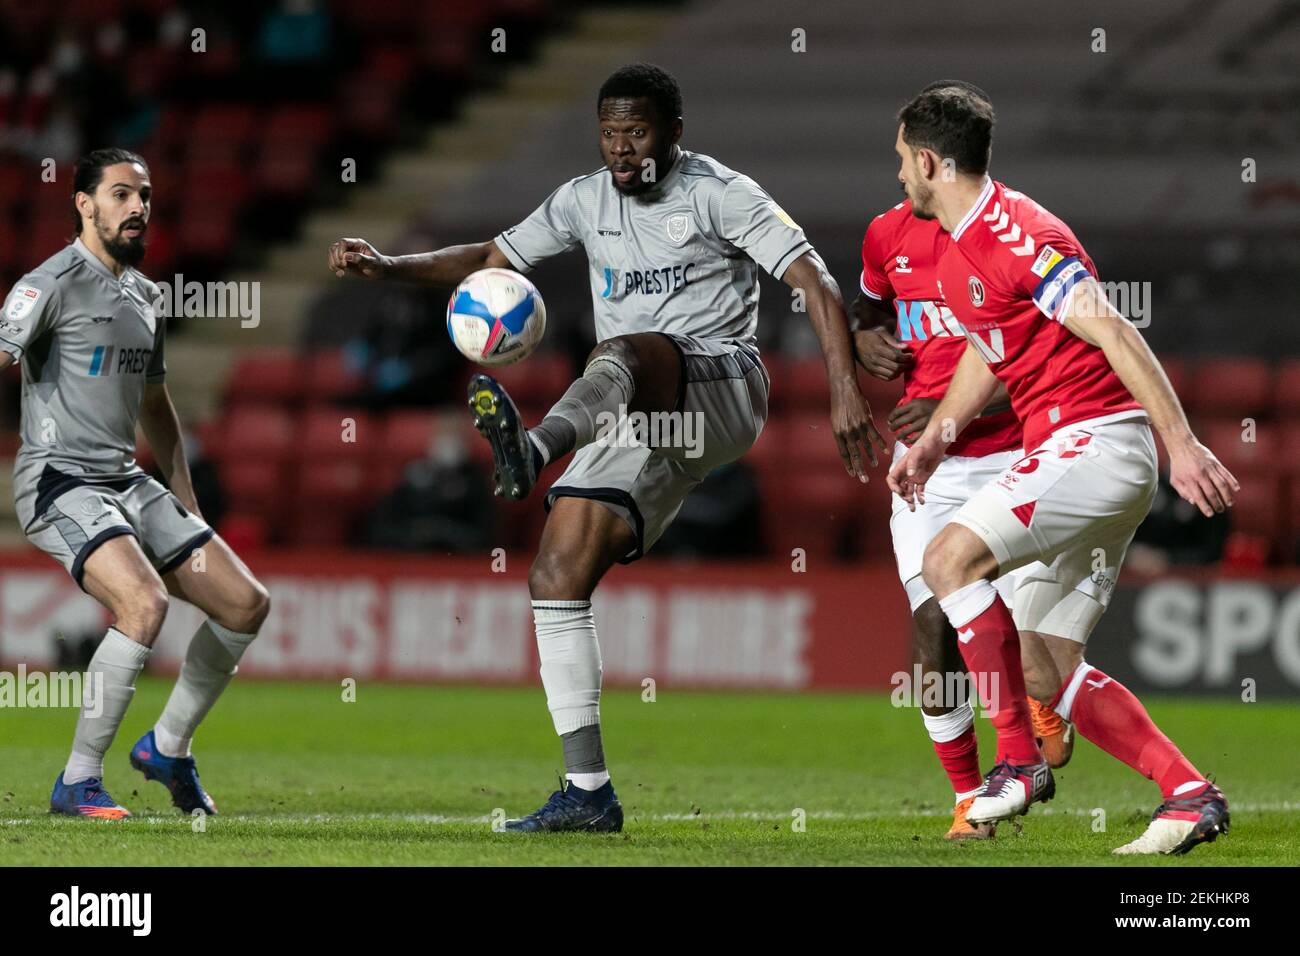 LONDON, ENGLAND. FEB 23RD: Mike Fondop of Burton Albion controls the ball  during the Sky Bet League 1 match between Charlton Athletic and Burton  Albion at The Valley, London on Tuesday 23rd